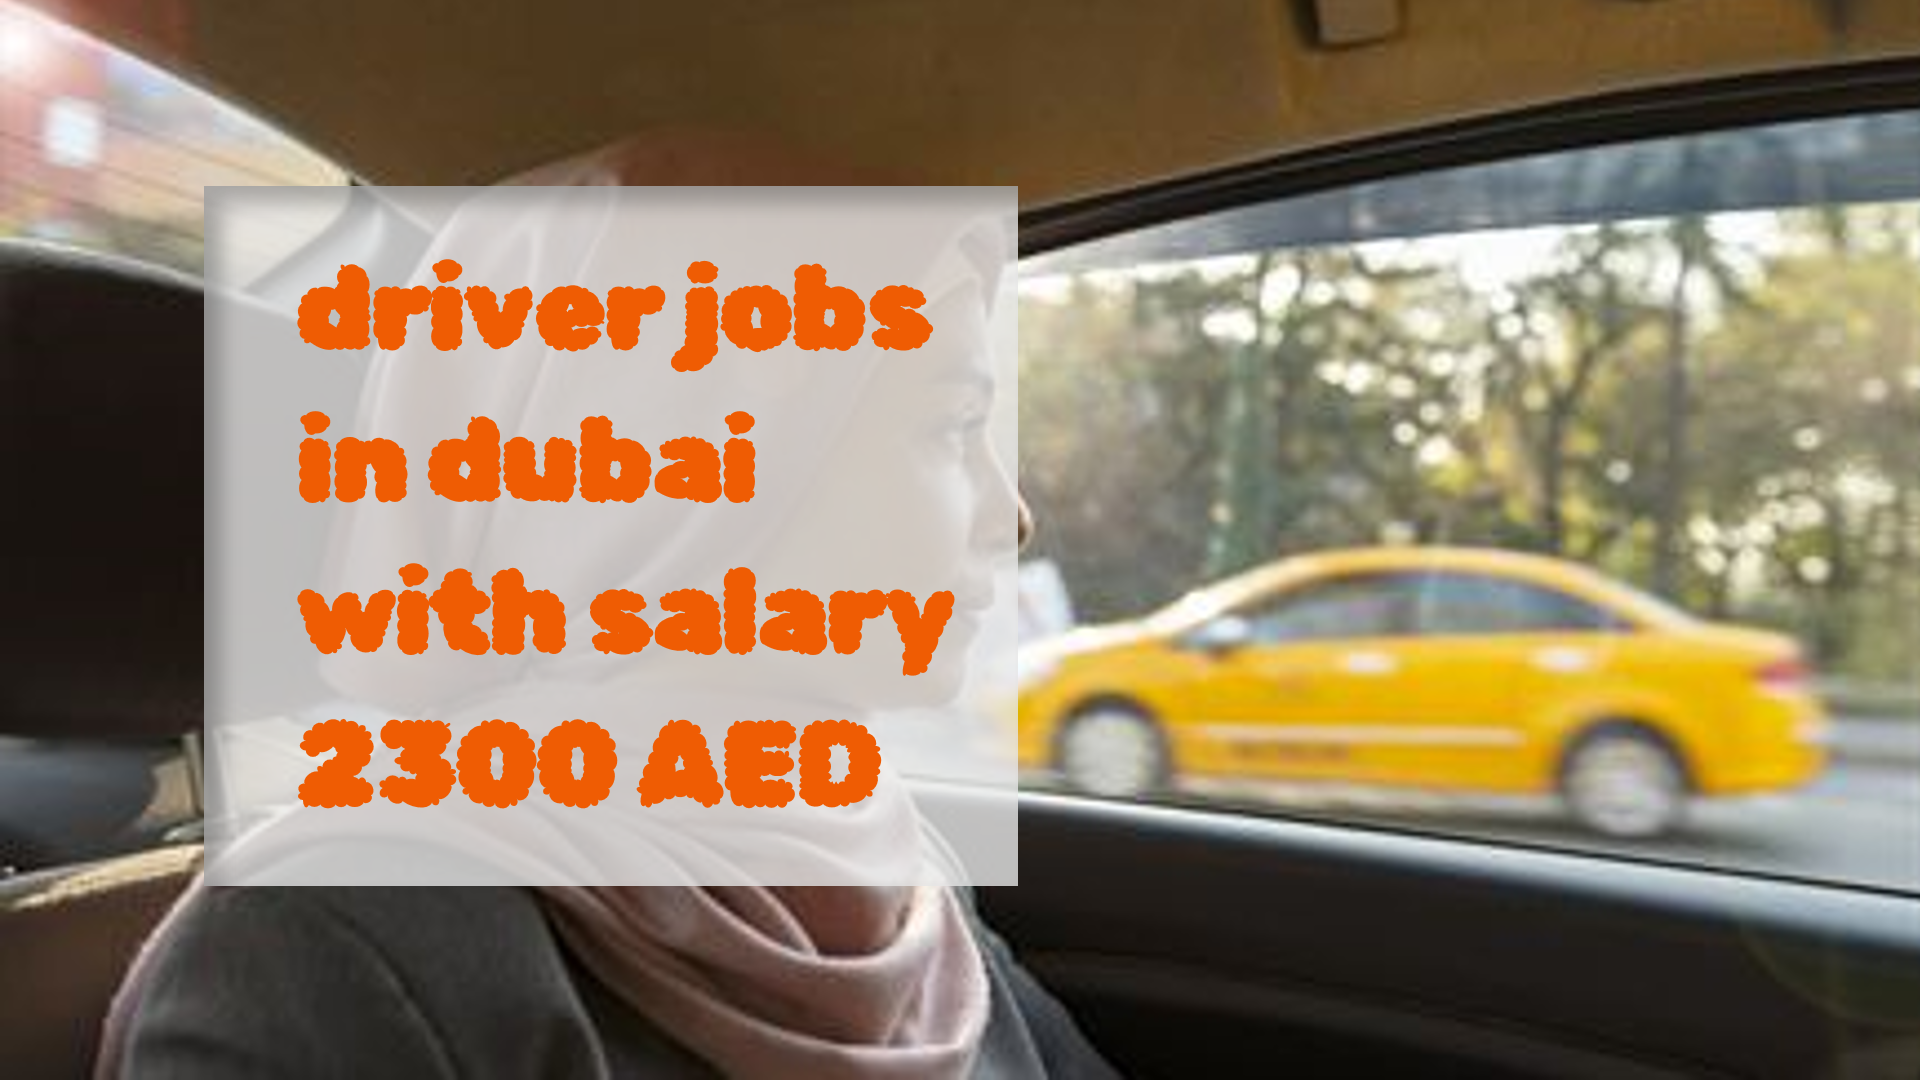 driver jobs in dubai with salary 2300 AED